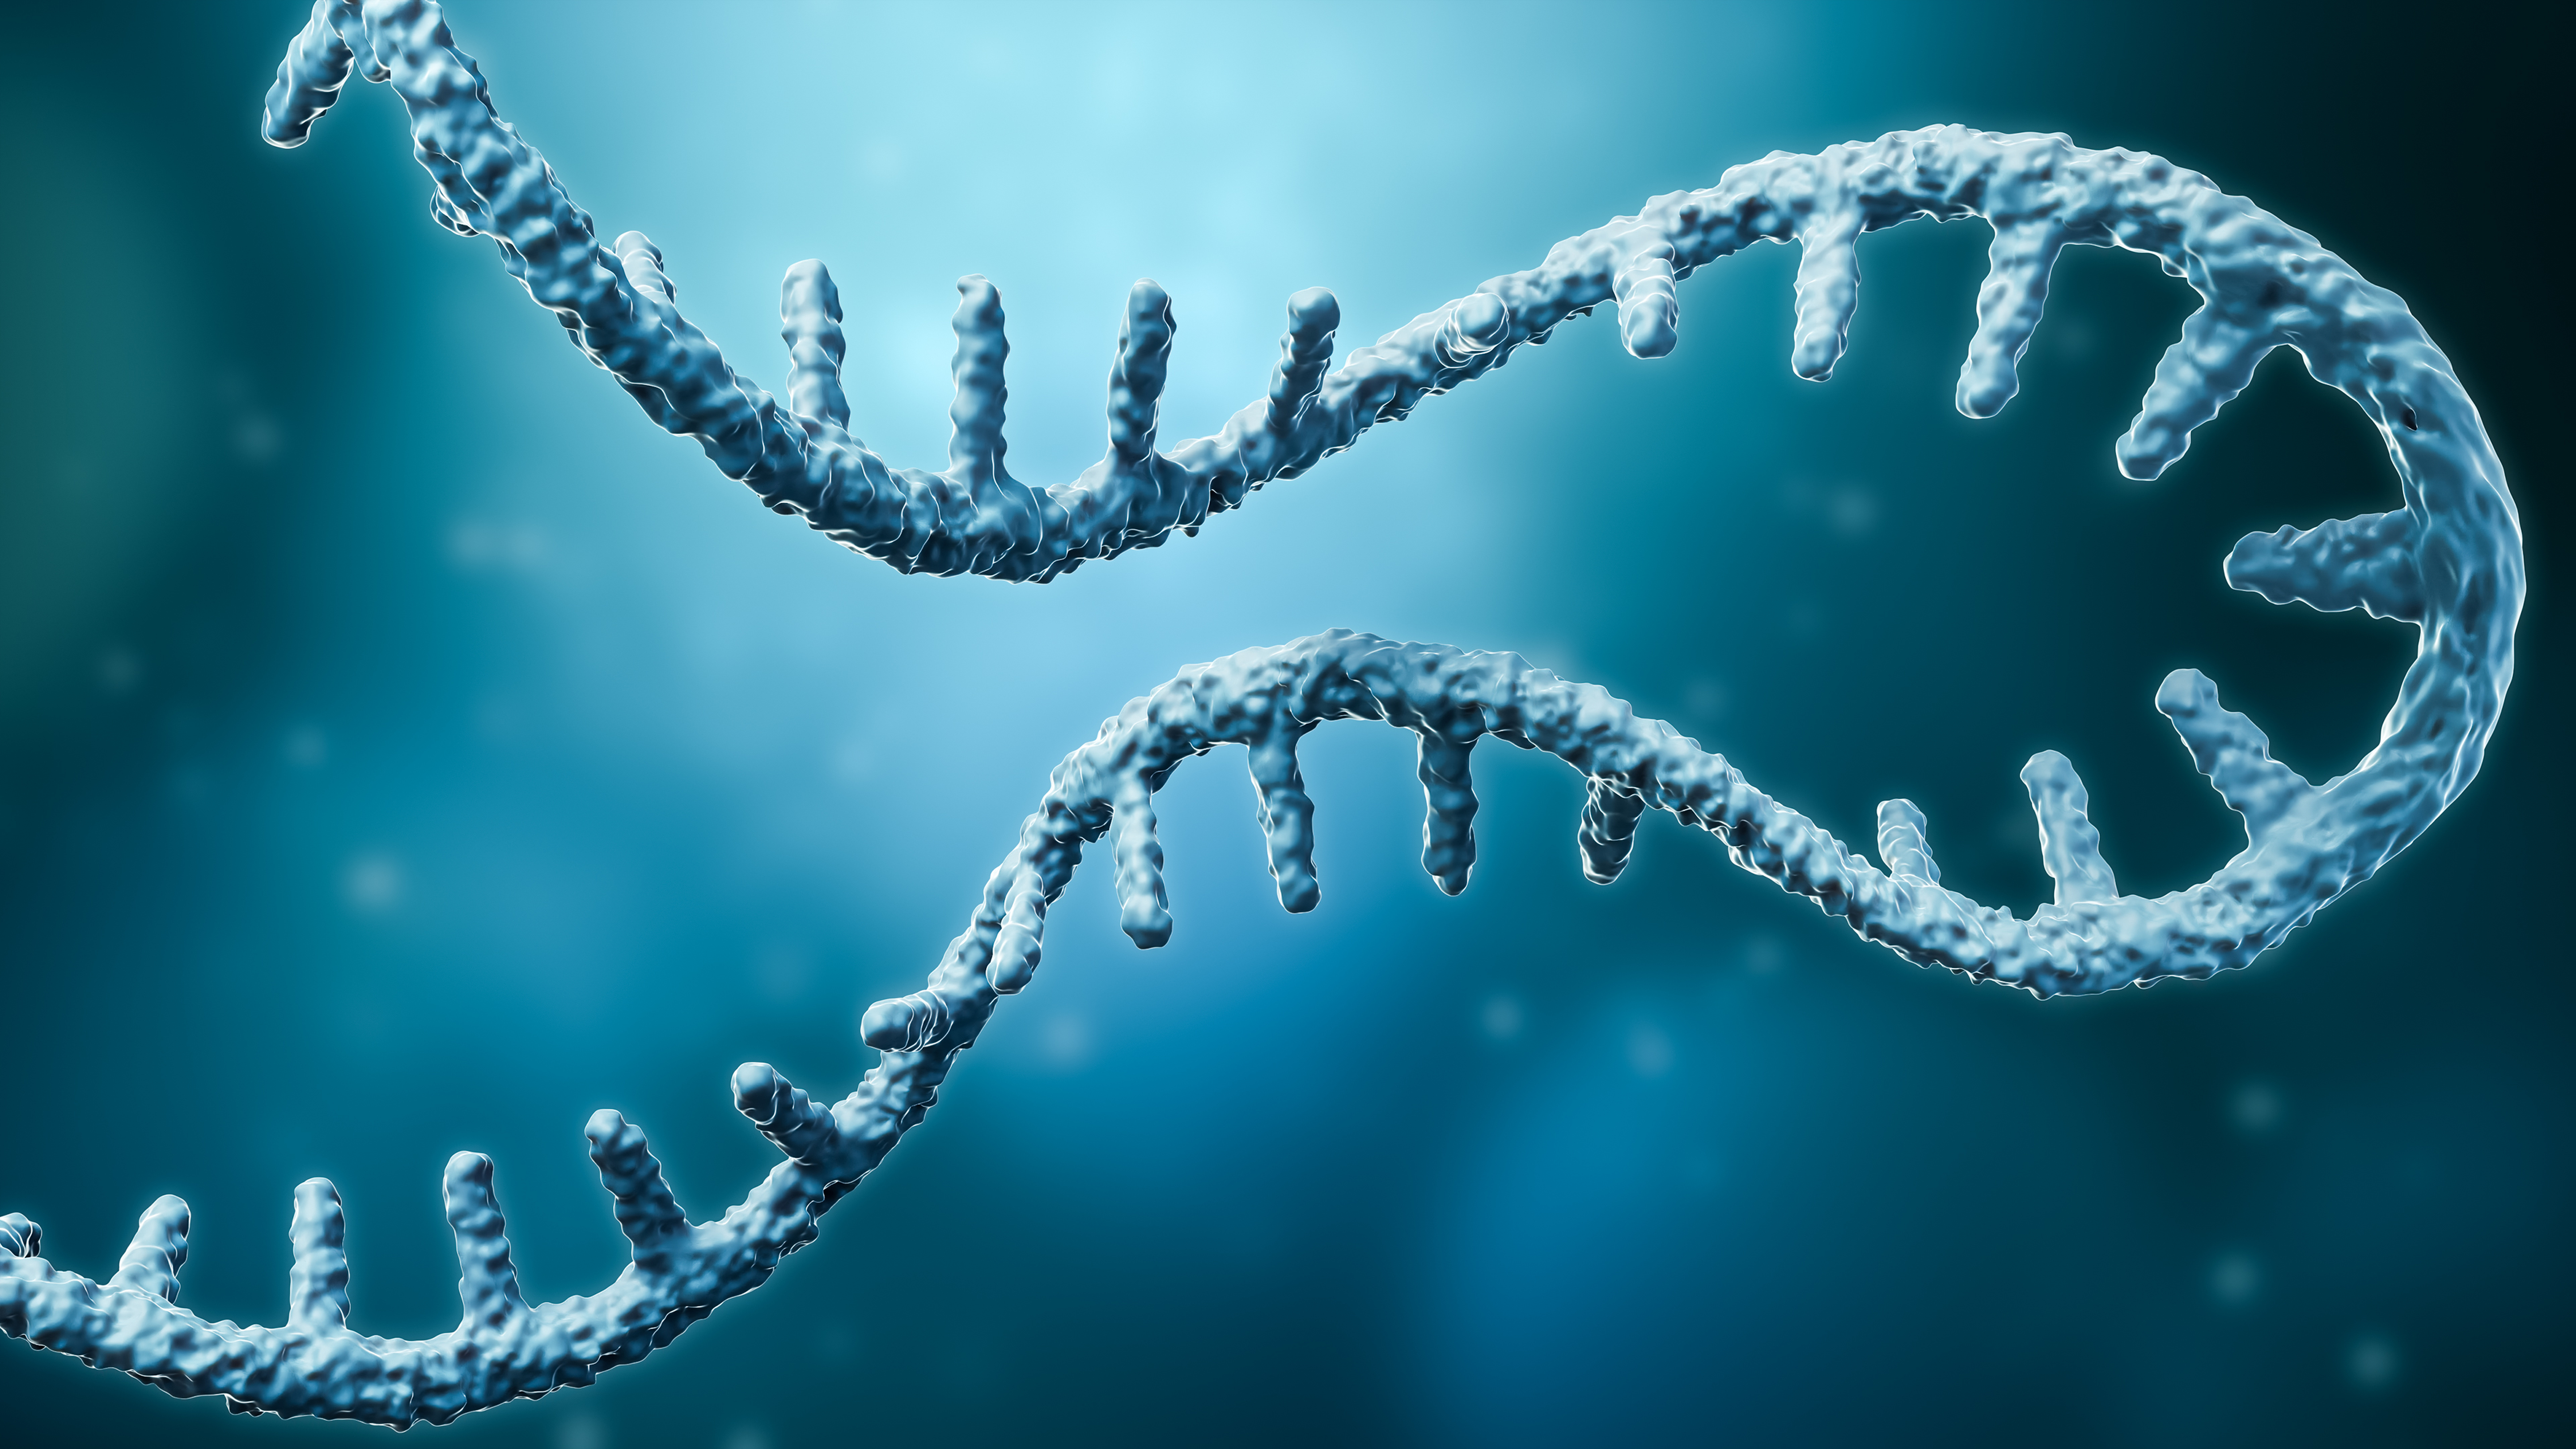 The history of mRNA applications - The DNA Universe BLOG